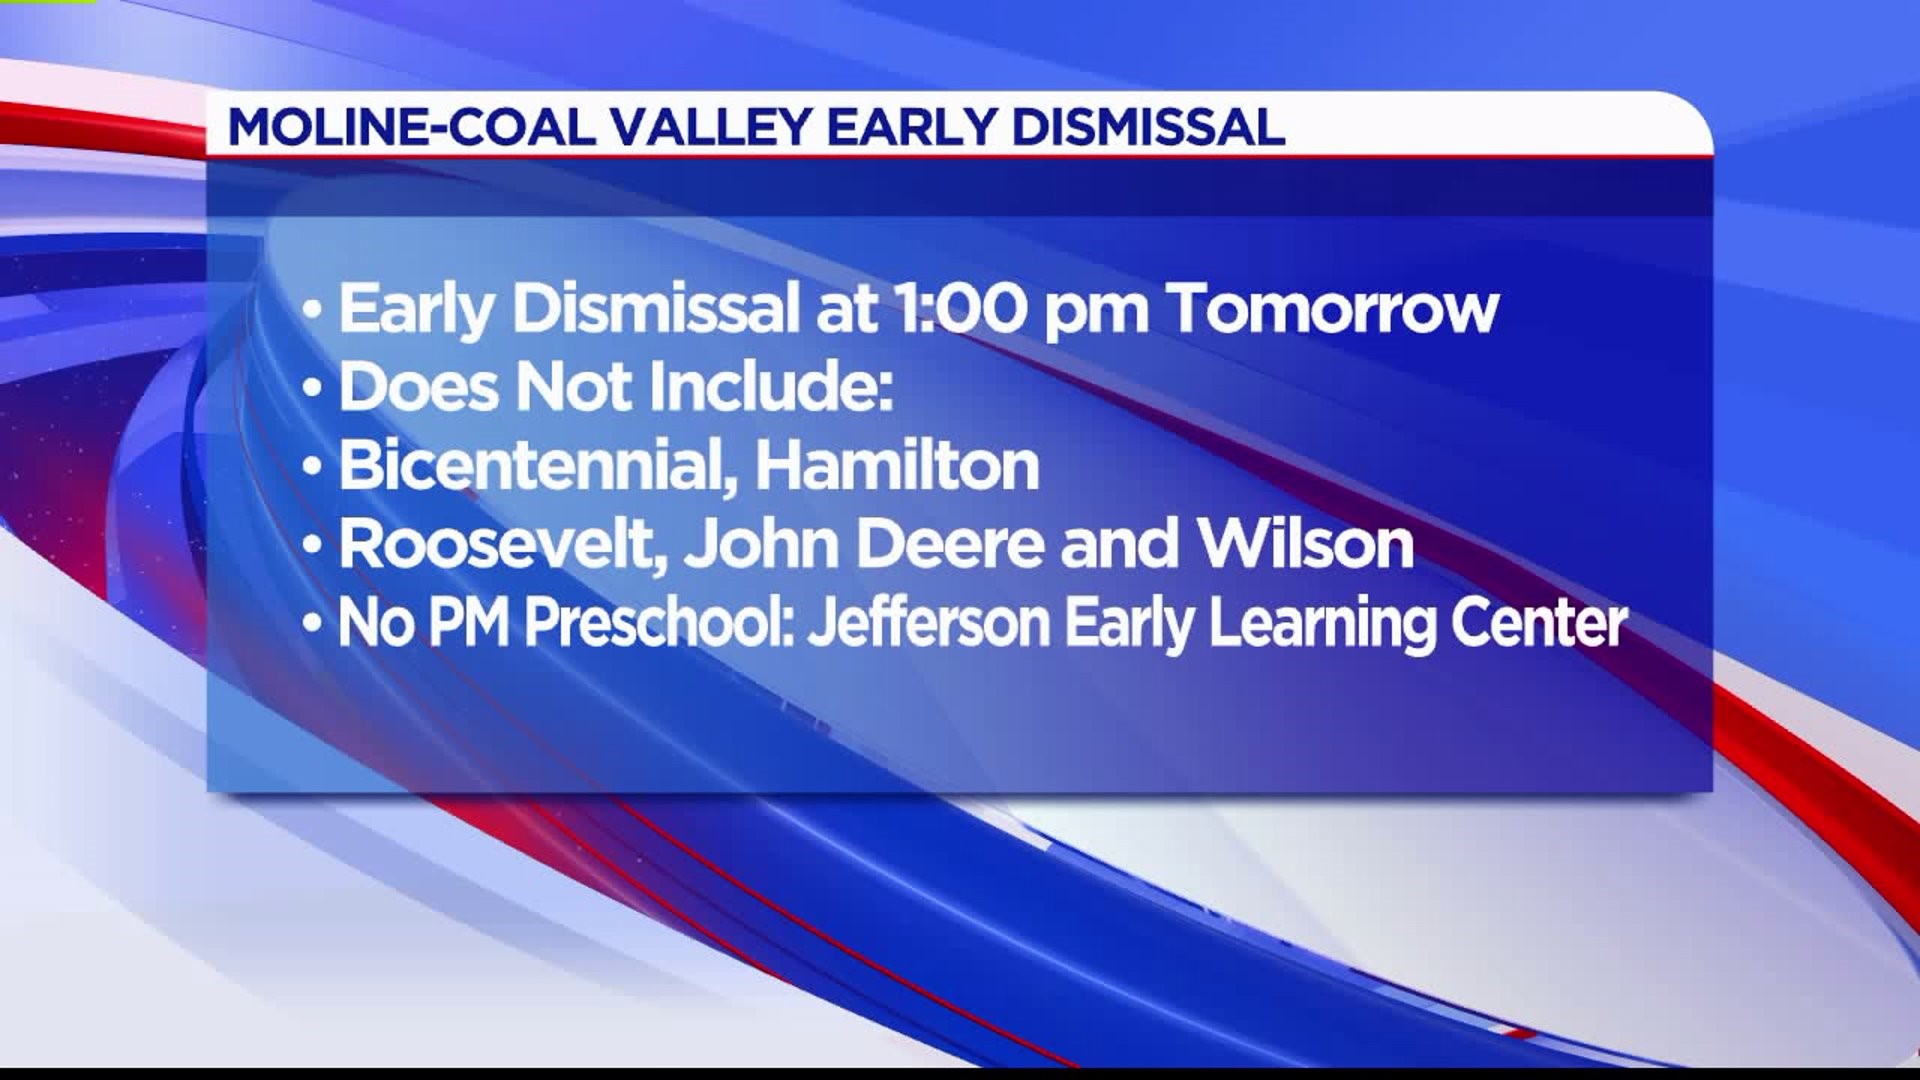 Moline-Coal Valley early dismissal